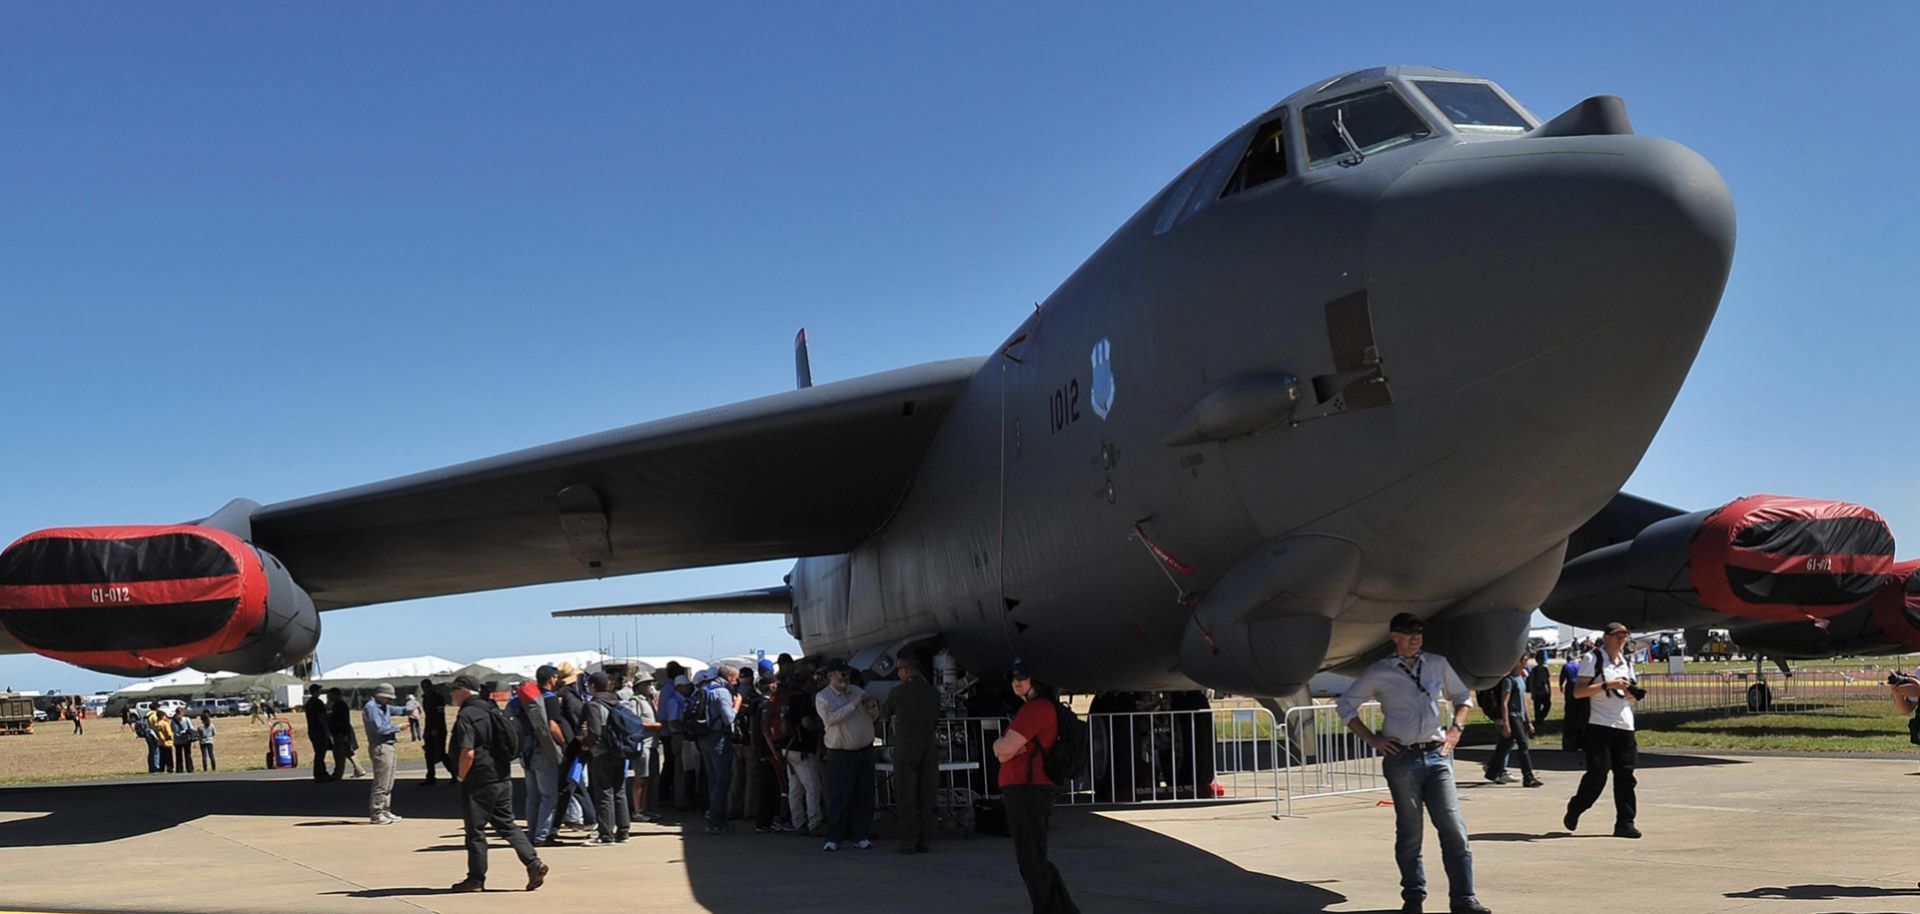 Patrons line up to look through a US Air Force B-52 bomber during the Australian International Airshow in Melbourne on March 1, 2013. 180,000 patrons are expected through the gates over the duration of the event staged at the Avalon Airfield some 80kms south-west of Melbourne. AFP PHOTO / Paul CROCK (Photo credit should read PAUL CROCK/AFP/Getty Images)